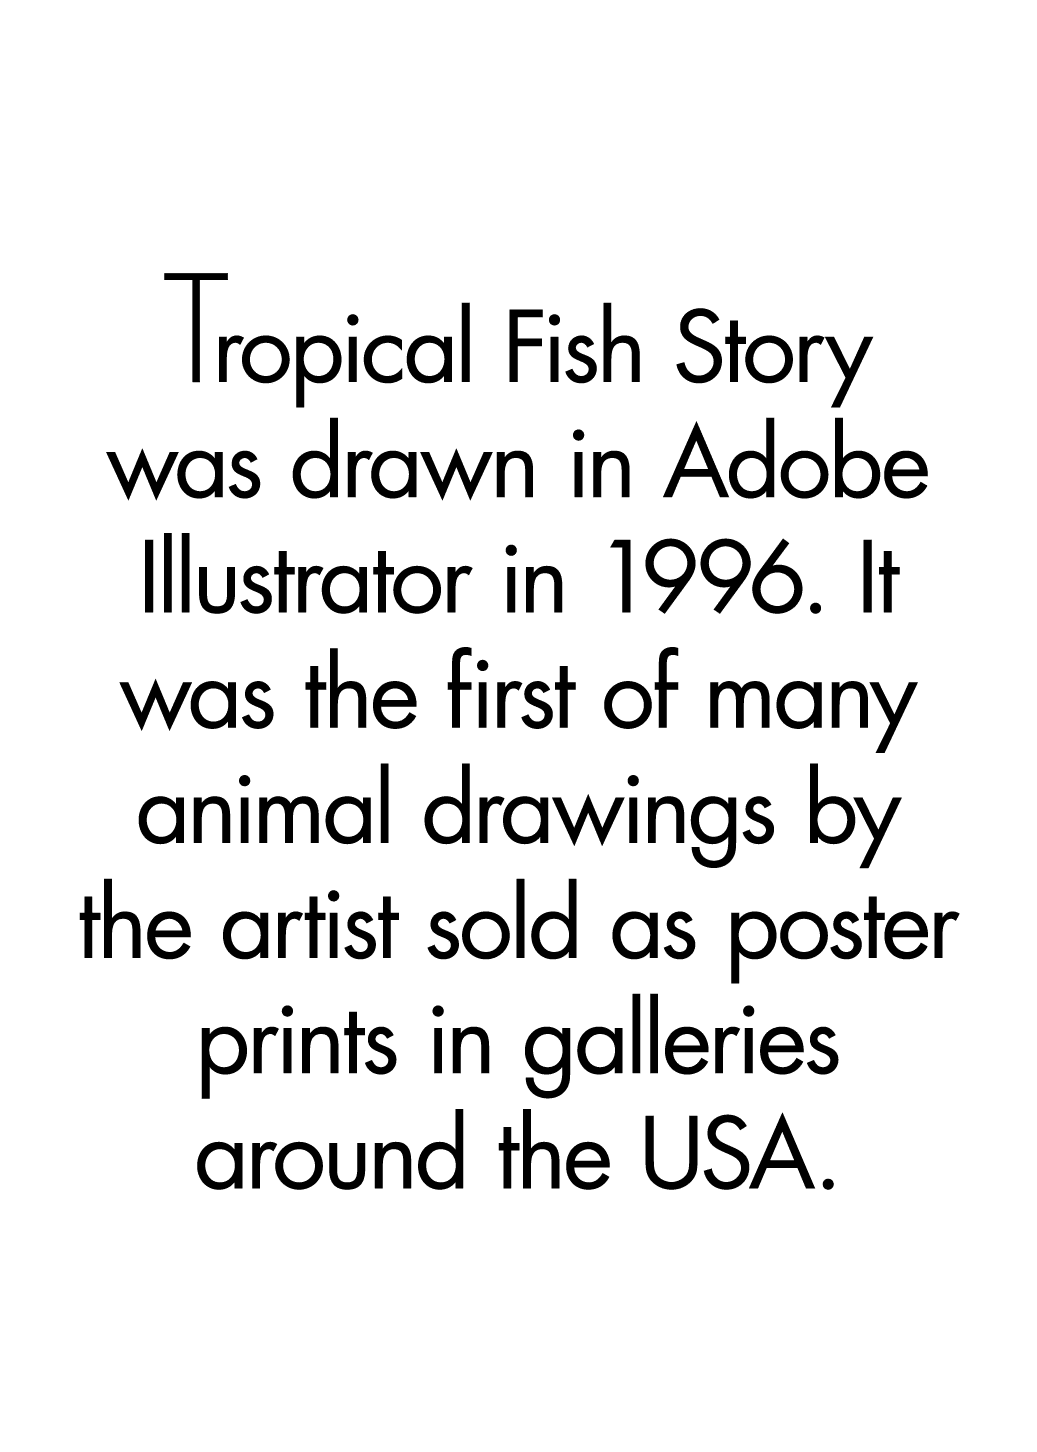 Tropical Fish Story was drawn in Adobe Illustrator in 1996. It was the first of many animal drawings by the artist so...